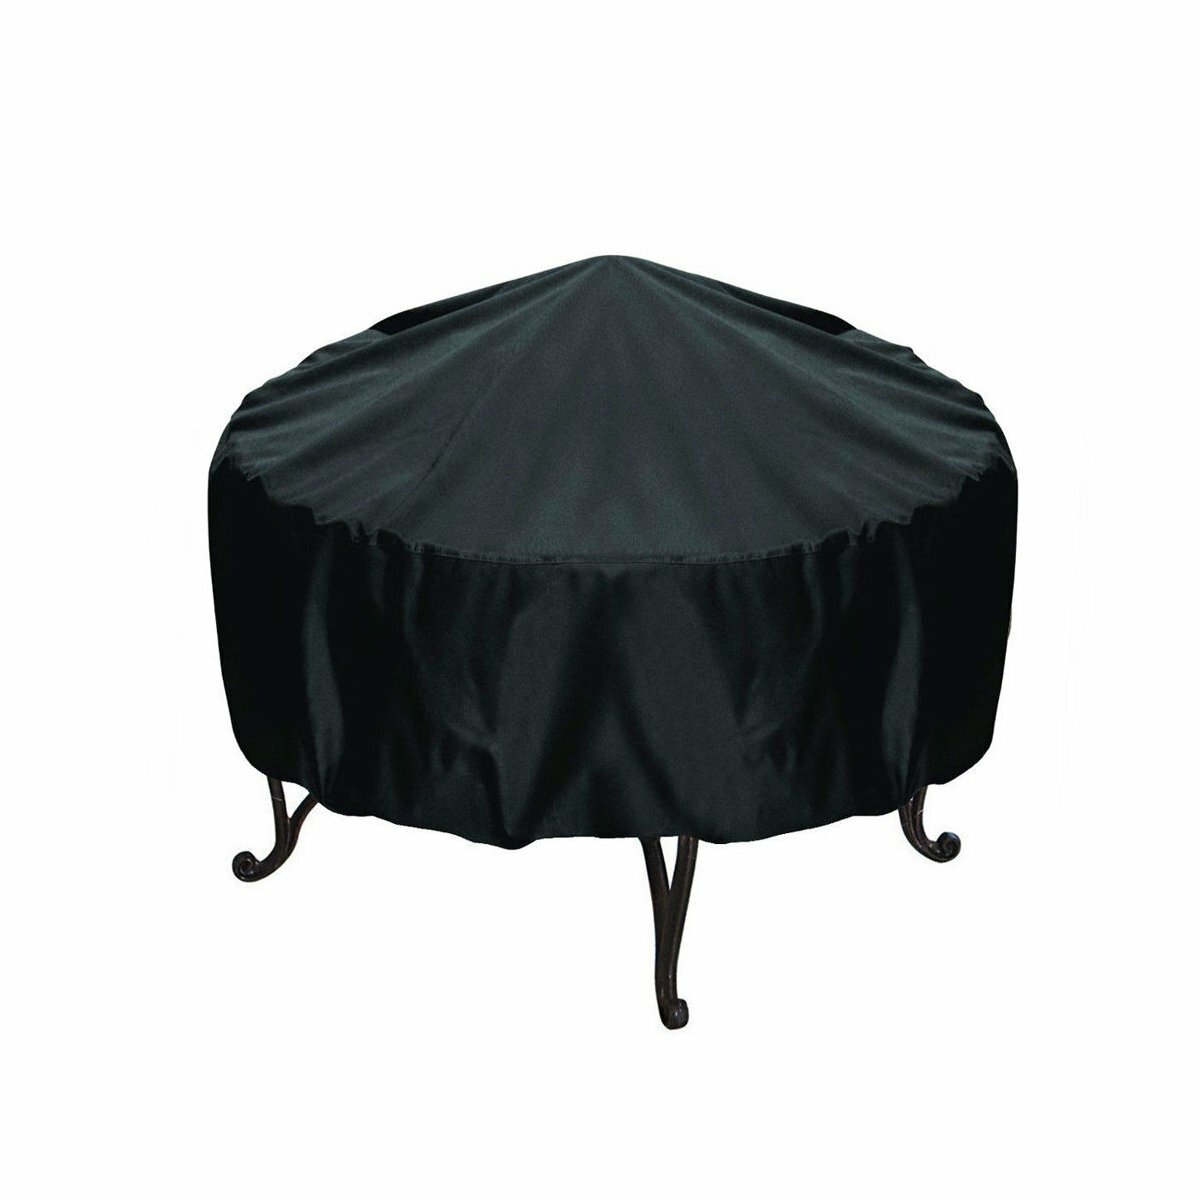 Patio Round Fire Pit Cover Waterproof Grill BBQ Cooking Protector Zwart